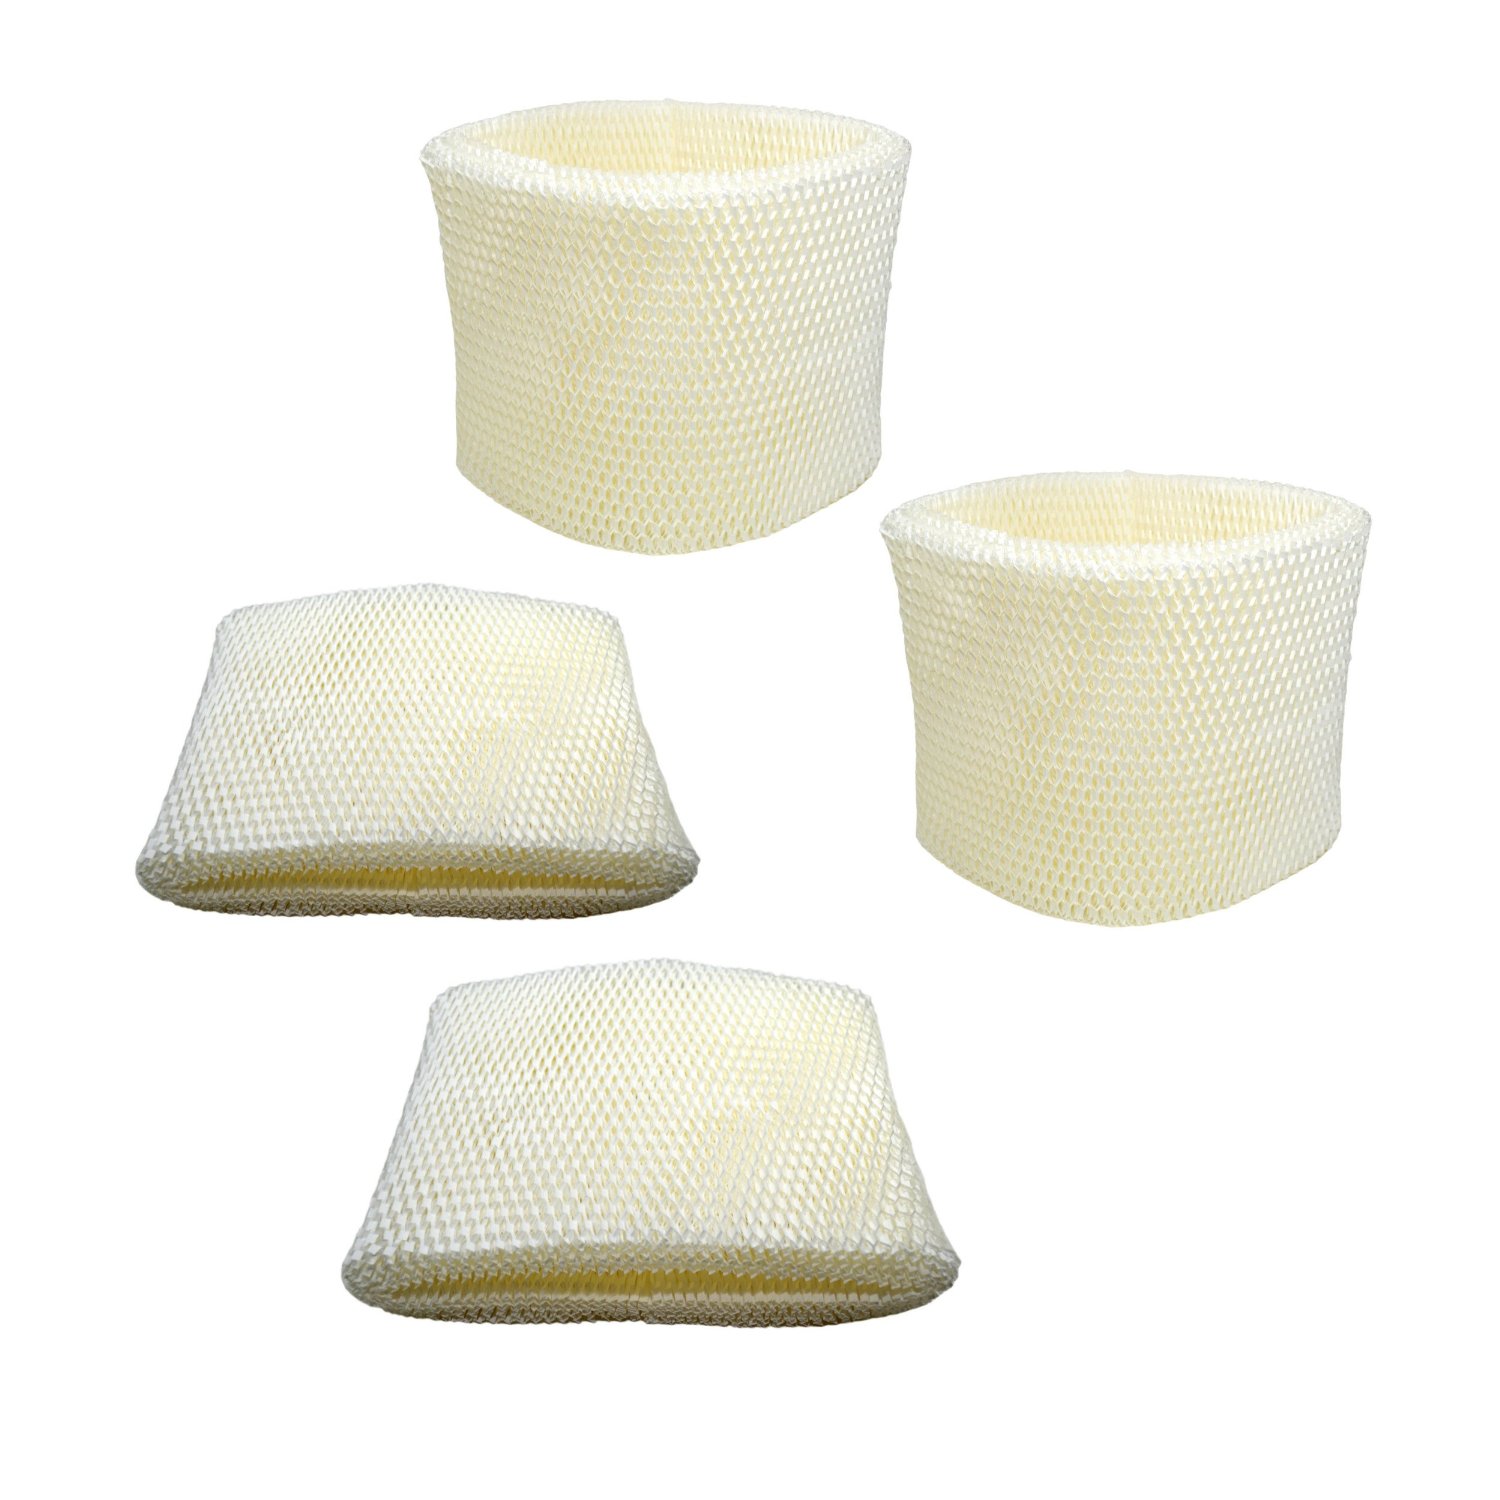 HQRP Pack of 4 Humidifier Filters for Bionaire BCM1845 BCM1845C BCM1850 BCM1850-cn BCM1855; BWF65 / BWF-65 / BWF-65 R Wick Filter